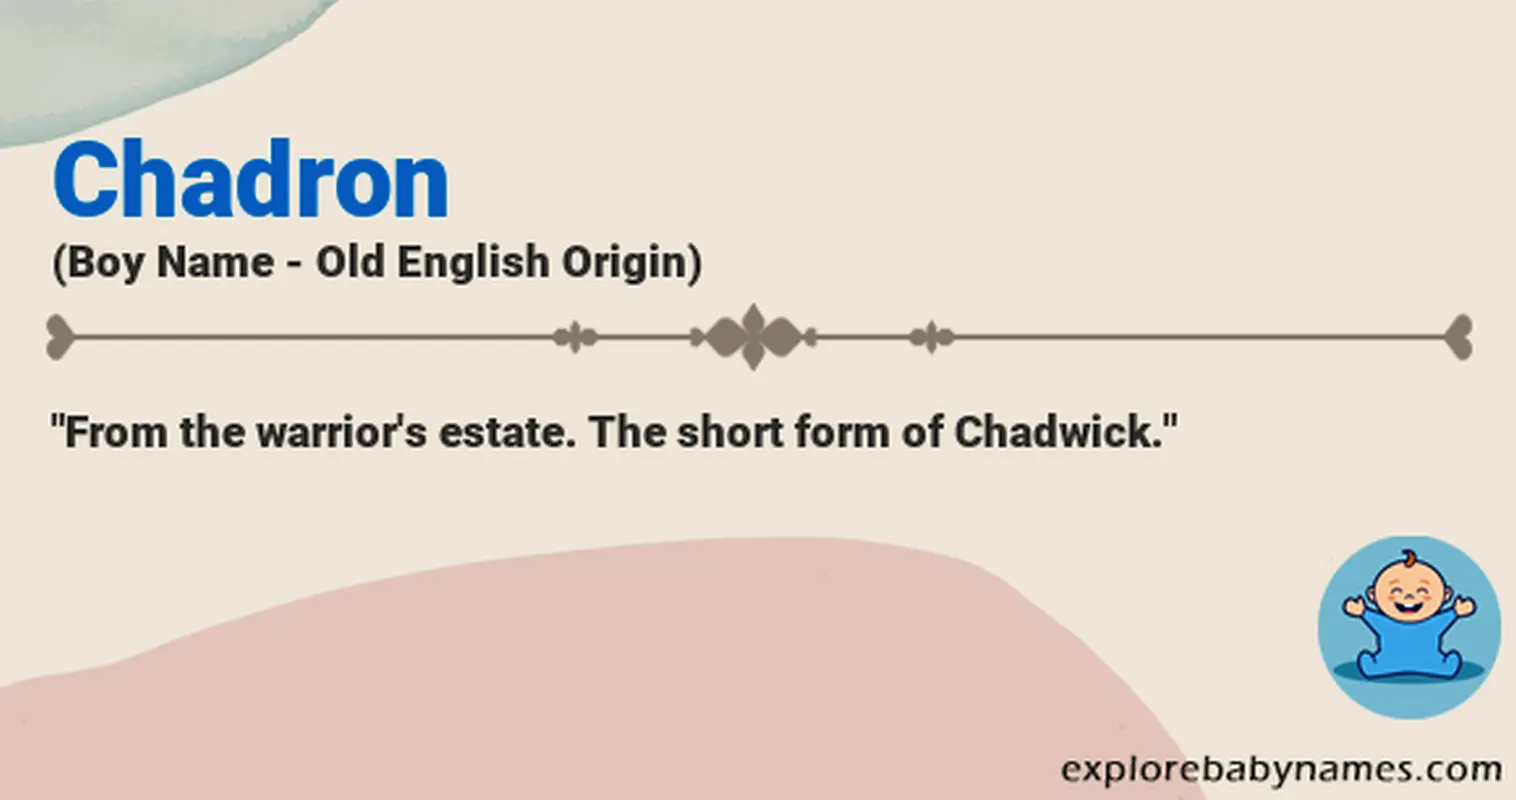 Meaning of Chadron